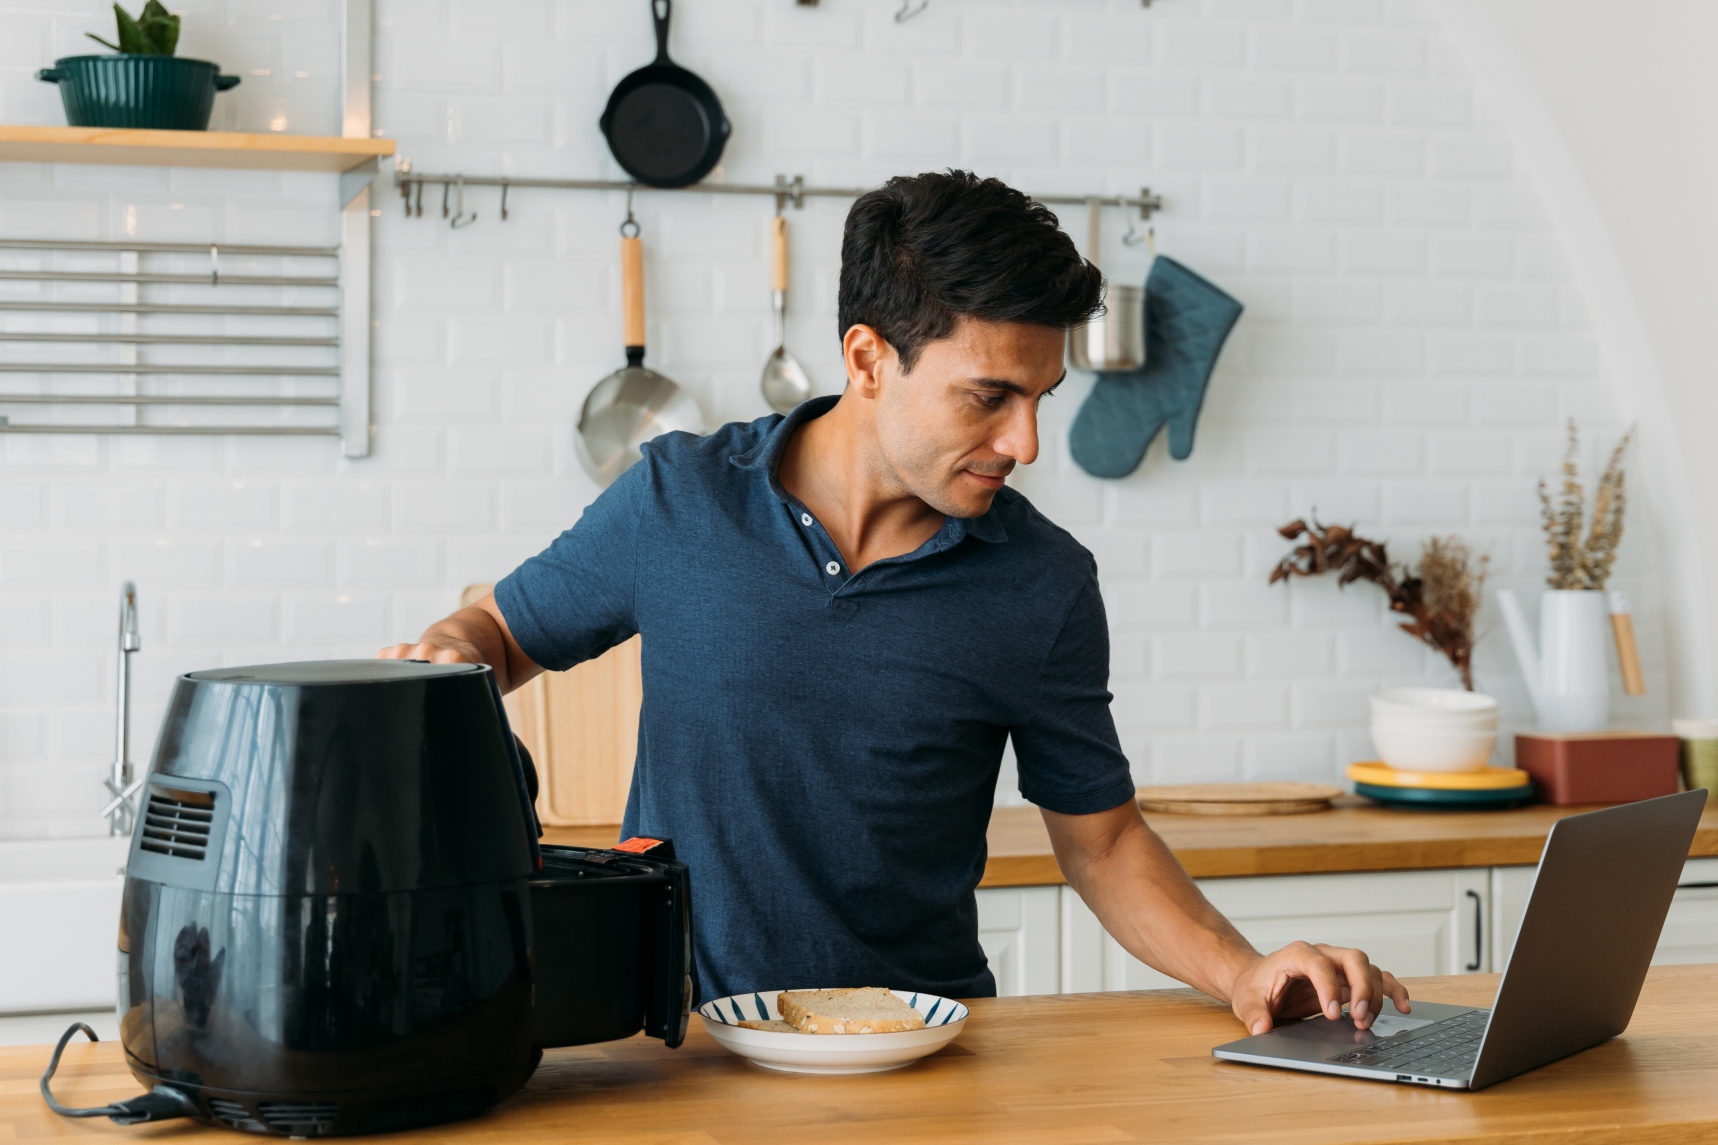 stock photo of a man in a kitchen using a laptop and an air fryer